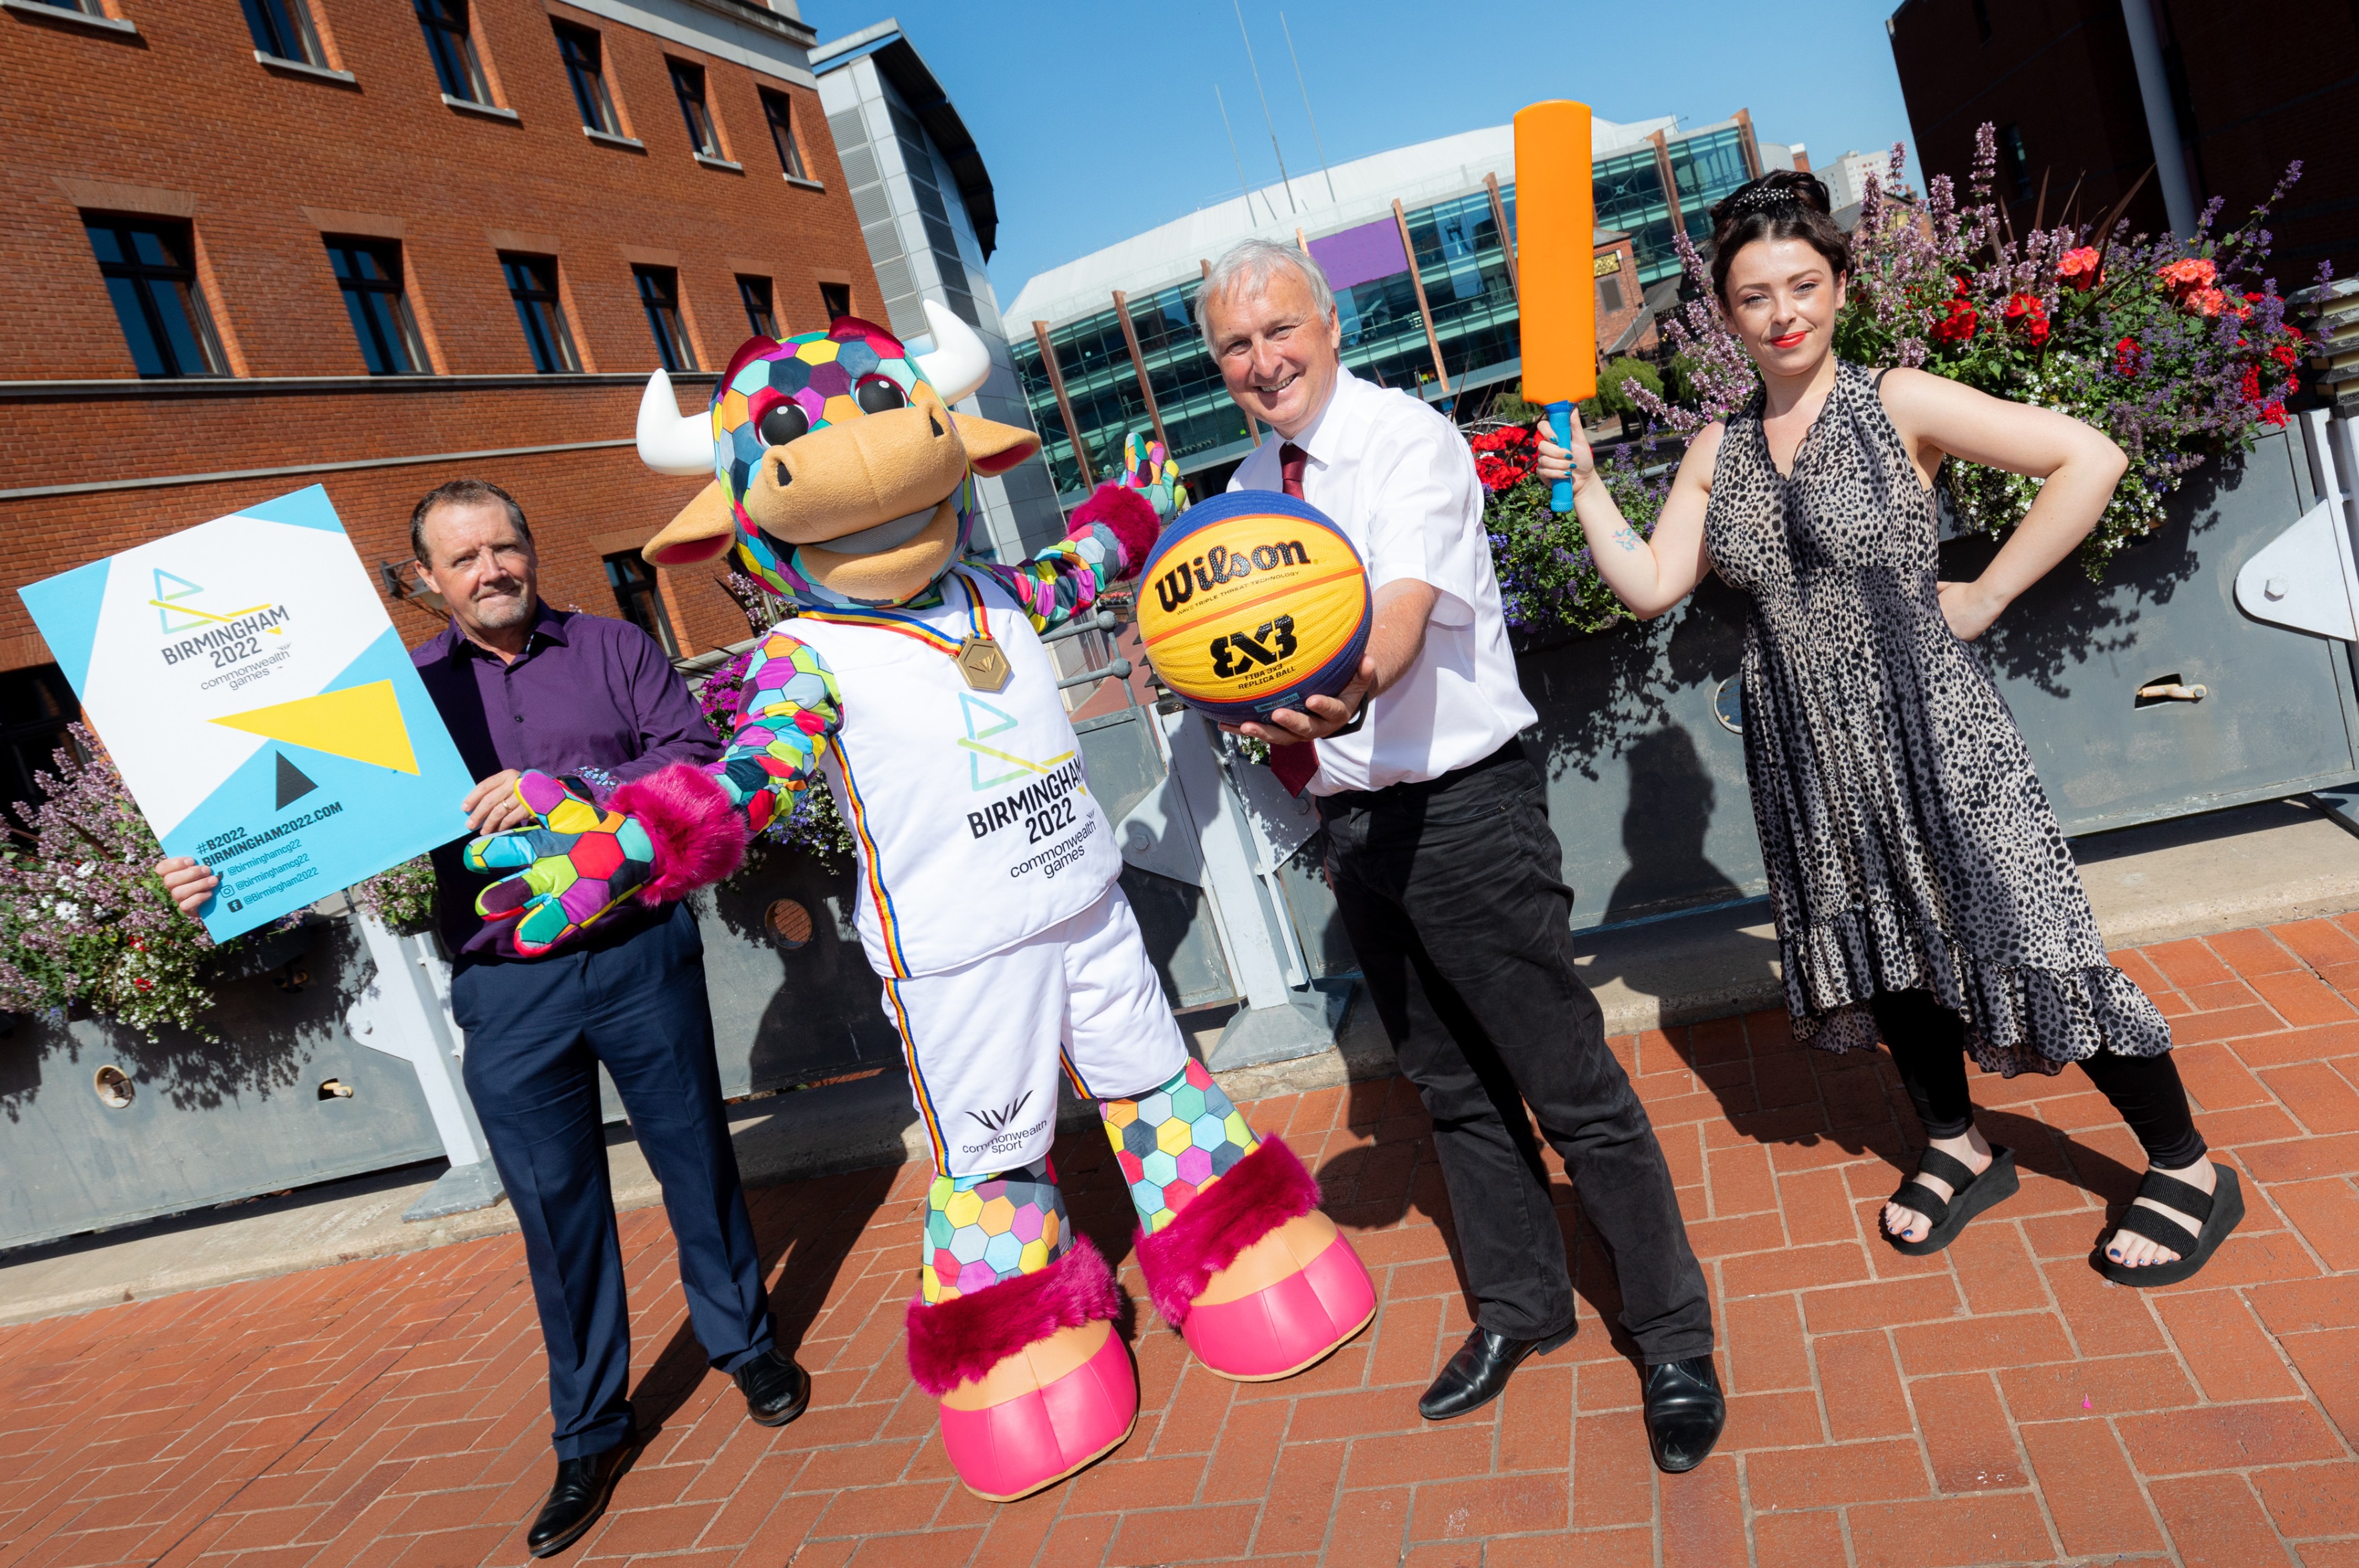 Representatives of the Birmingham Commonwealth Games 2022, Birmingham Children's Trust and Birmingham City Council stand with the games mascot Perry the bull.